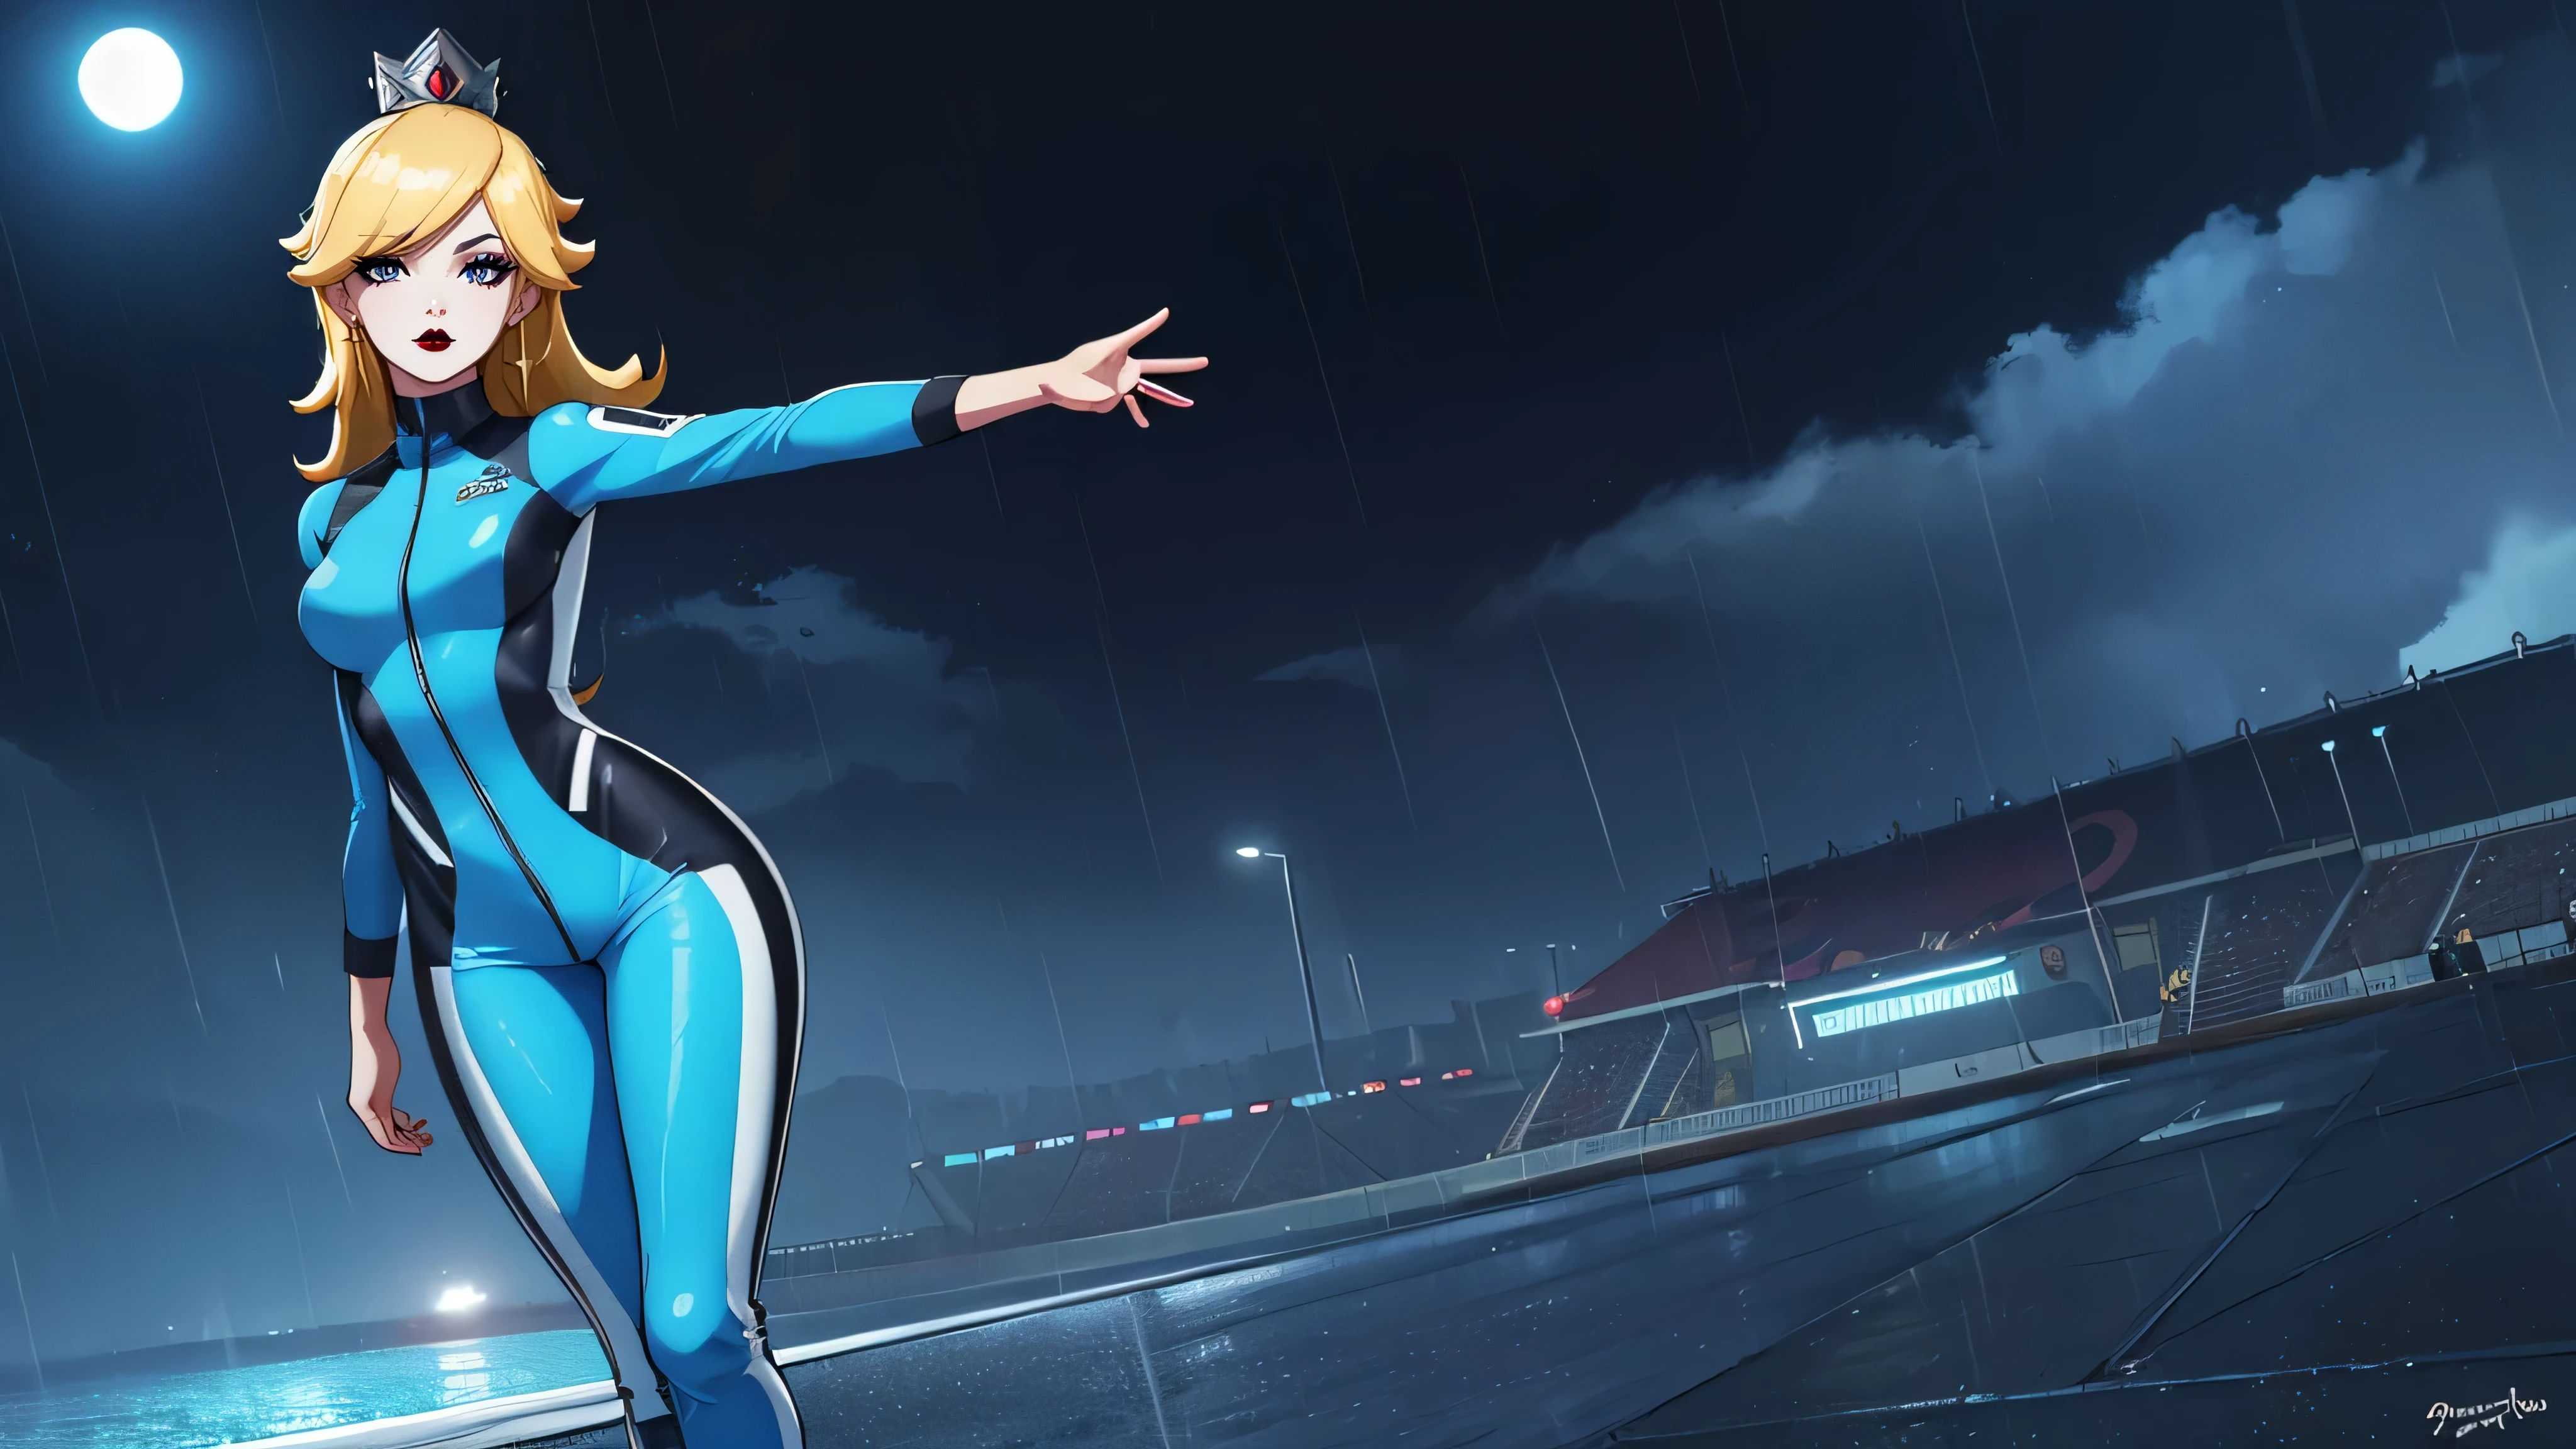 ((high detailed, best quality, 4k, masterpiece, hd:1.3)), BREAK rainy night, moonlight, landscape, it's raining, raining, a full-length shot of Rosalina standing posing under the rain, BREAK neon blue eyes, seductive, attractive, sexy smile, smiling, smooth anime cg art, 36C breasts, (long fitness legs), vivid colors, detailed digital art, slim body, perfect skin, wet blonde hair, wet long hair, wet hair, BREAK crown, BREAK looking at viewer, extremely detailed face, (blue jumpsuit), (Jumpsuit:1.5), (blue racing suit), (racing suit:1.5), (blue high heels), full wet body, wet body, earrings, gem, dark gothic eyeshadows, dark eyeshadows, black eyeshadows, black_sexy_lips, black lips, dark lips, gothic painted lips, dark_red_lips, very dark lips, red_painted_lips, (very thin lips), thin lips, detailed lips, (dark:1.2), (perfect hands, perfect anatomy), black makeup, detailed fingers, five fingers per hand, 5 fingers, (1 girl), (solo:1.3), (arms outstretched:1.3),